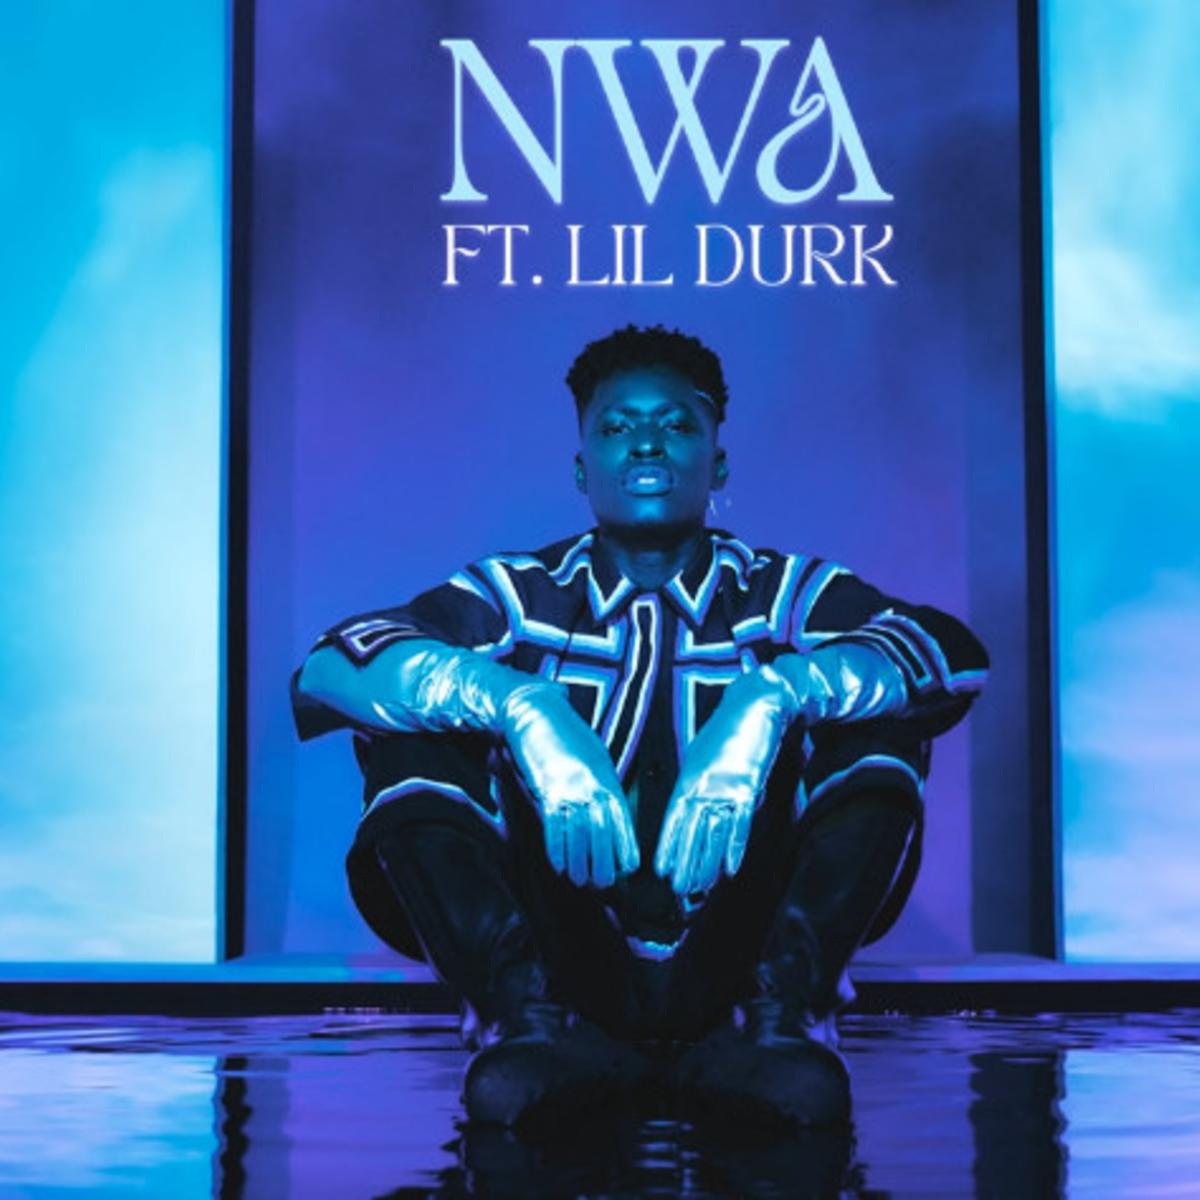 Lucky Daye Calls On Lil Durk For “NWA”